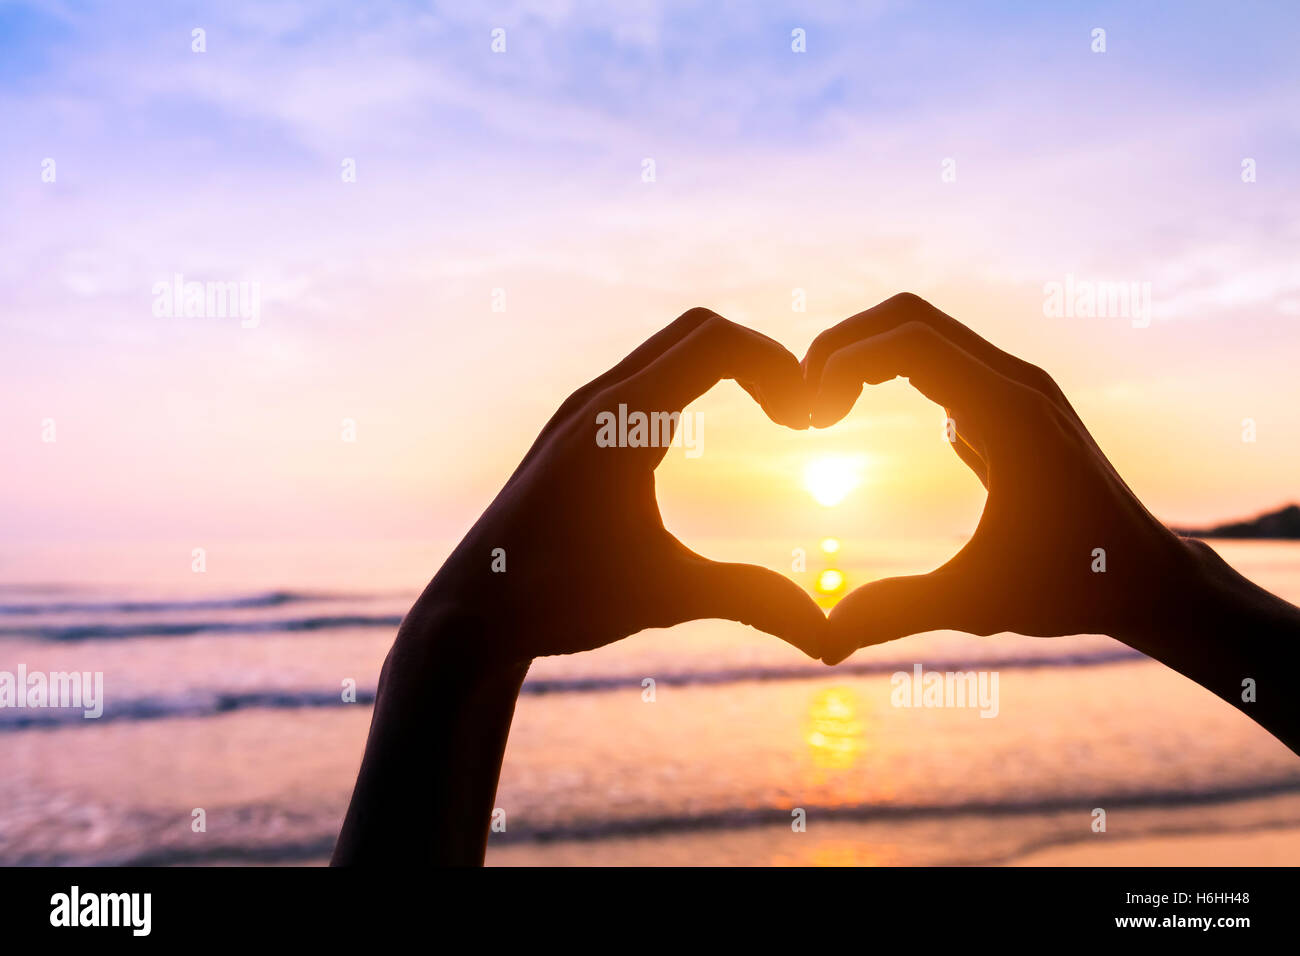 Shape of heart done with silhouette of hands on a beach with sunset sun and colors - Symbol of love - Romantic travel Stock Photo